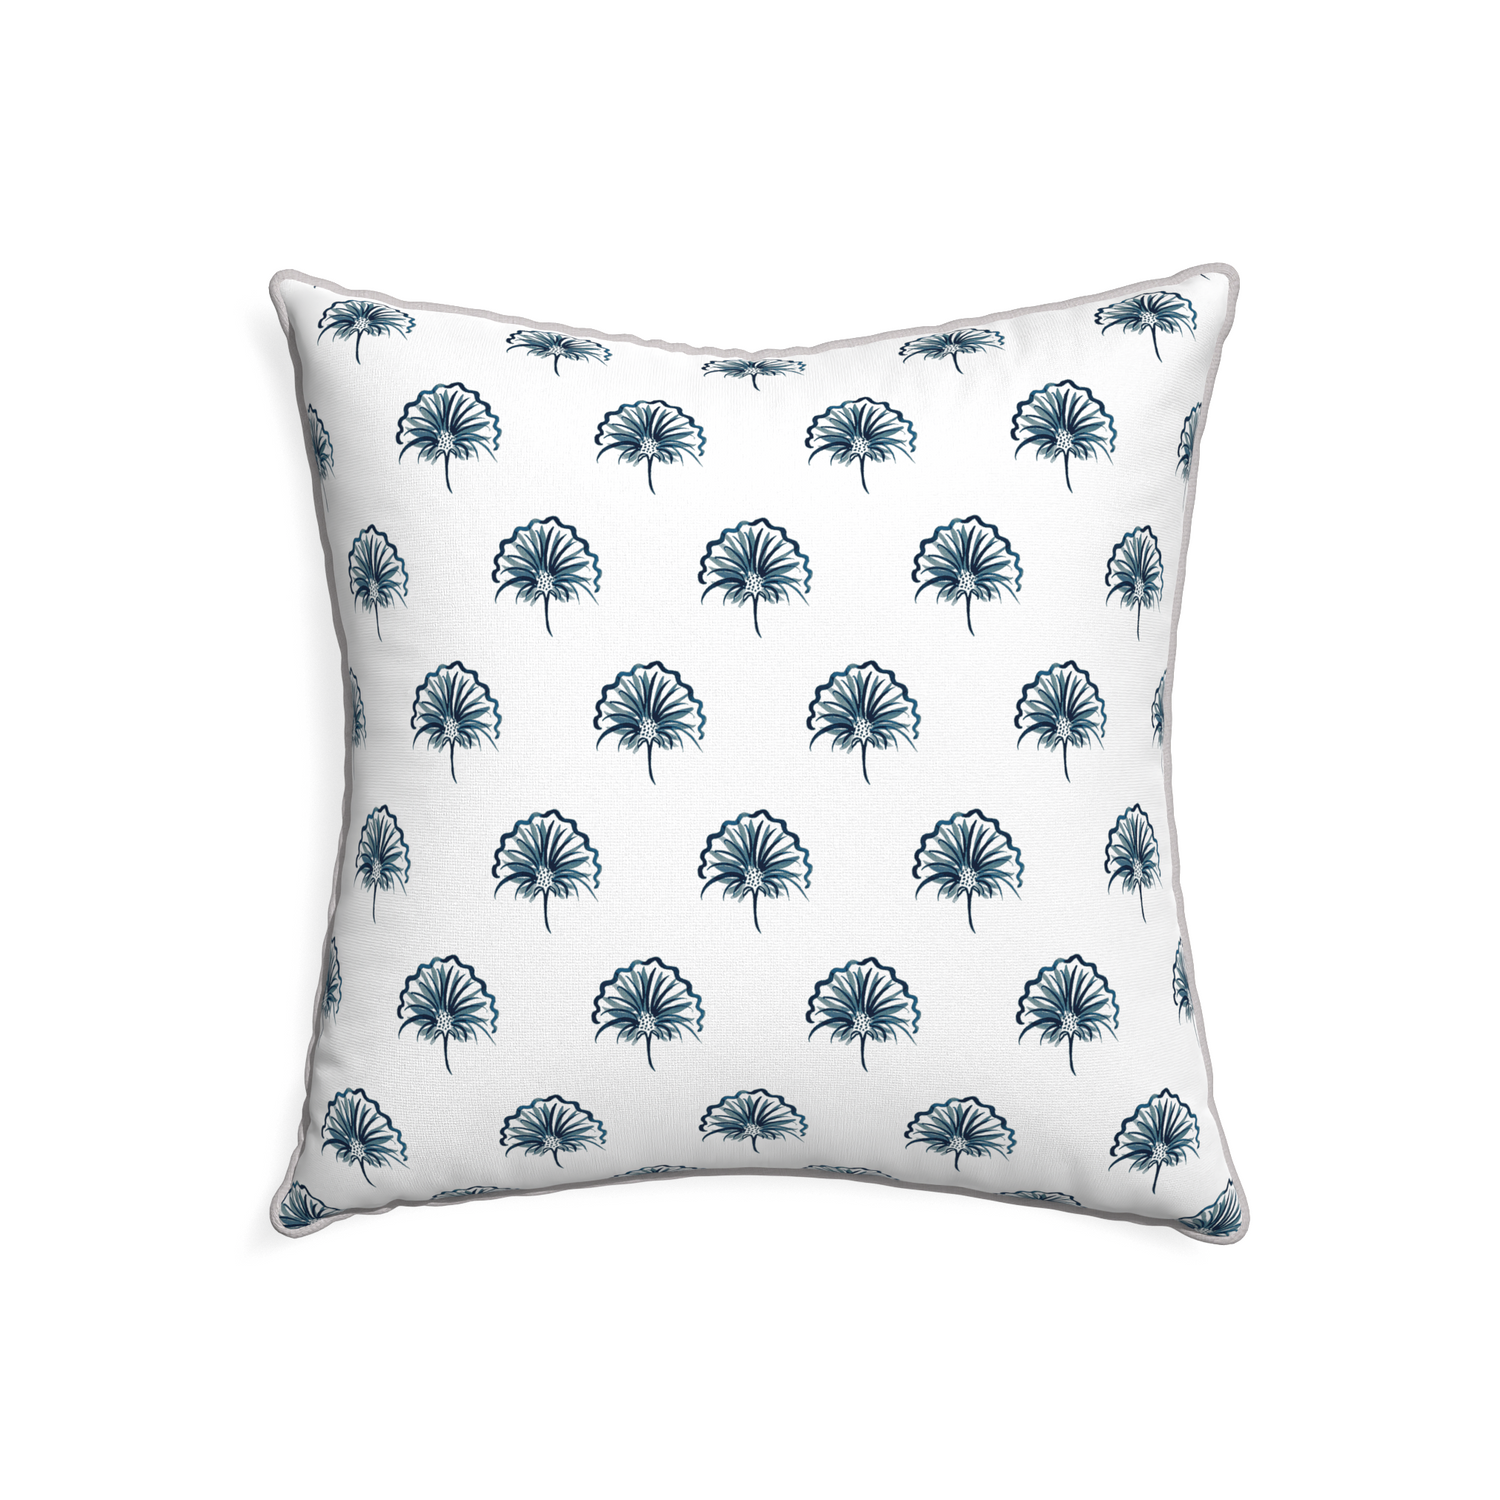 22-square penelope midnight custom floral navypillow with pebble piping on white background